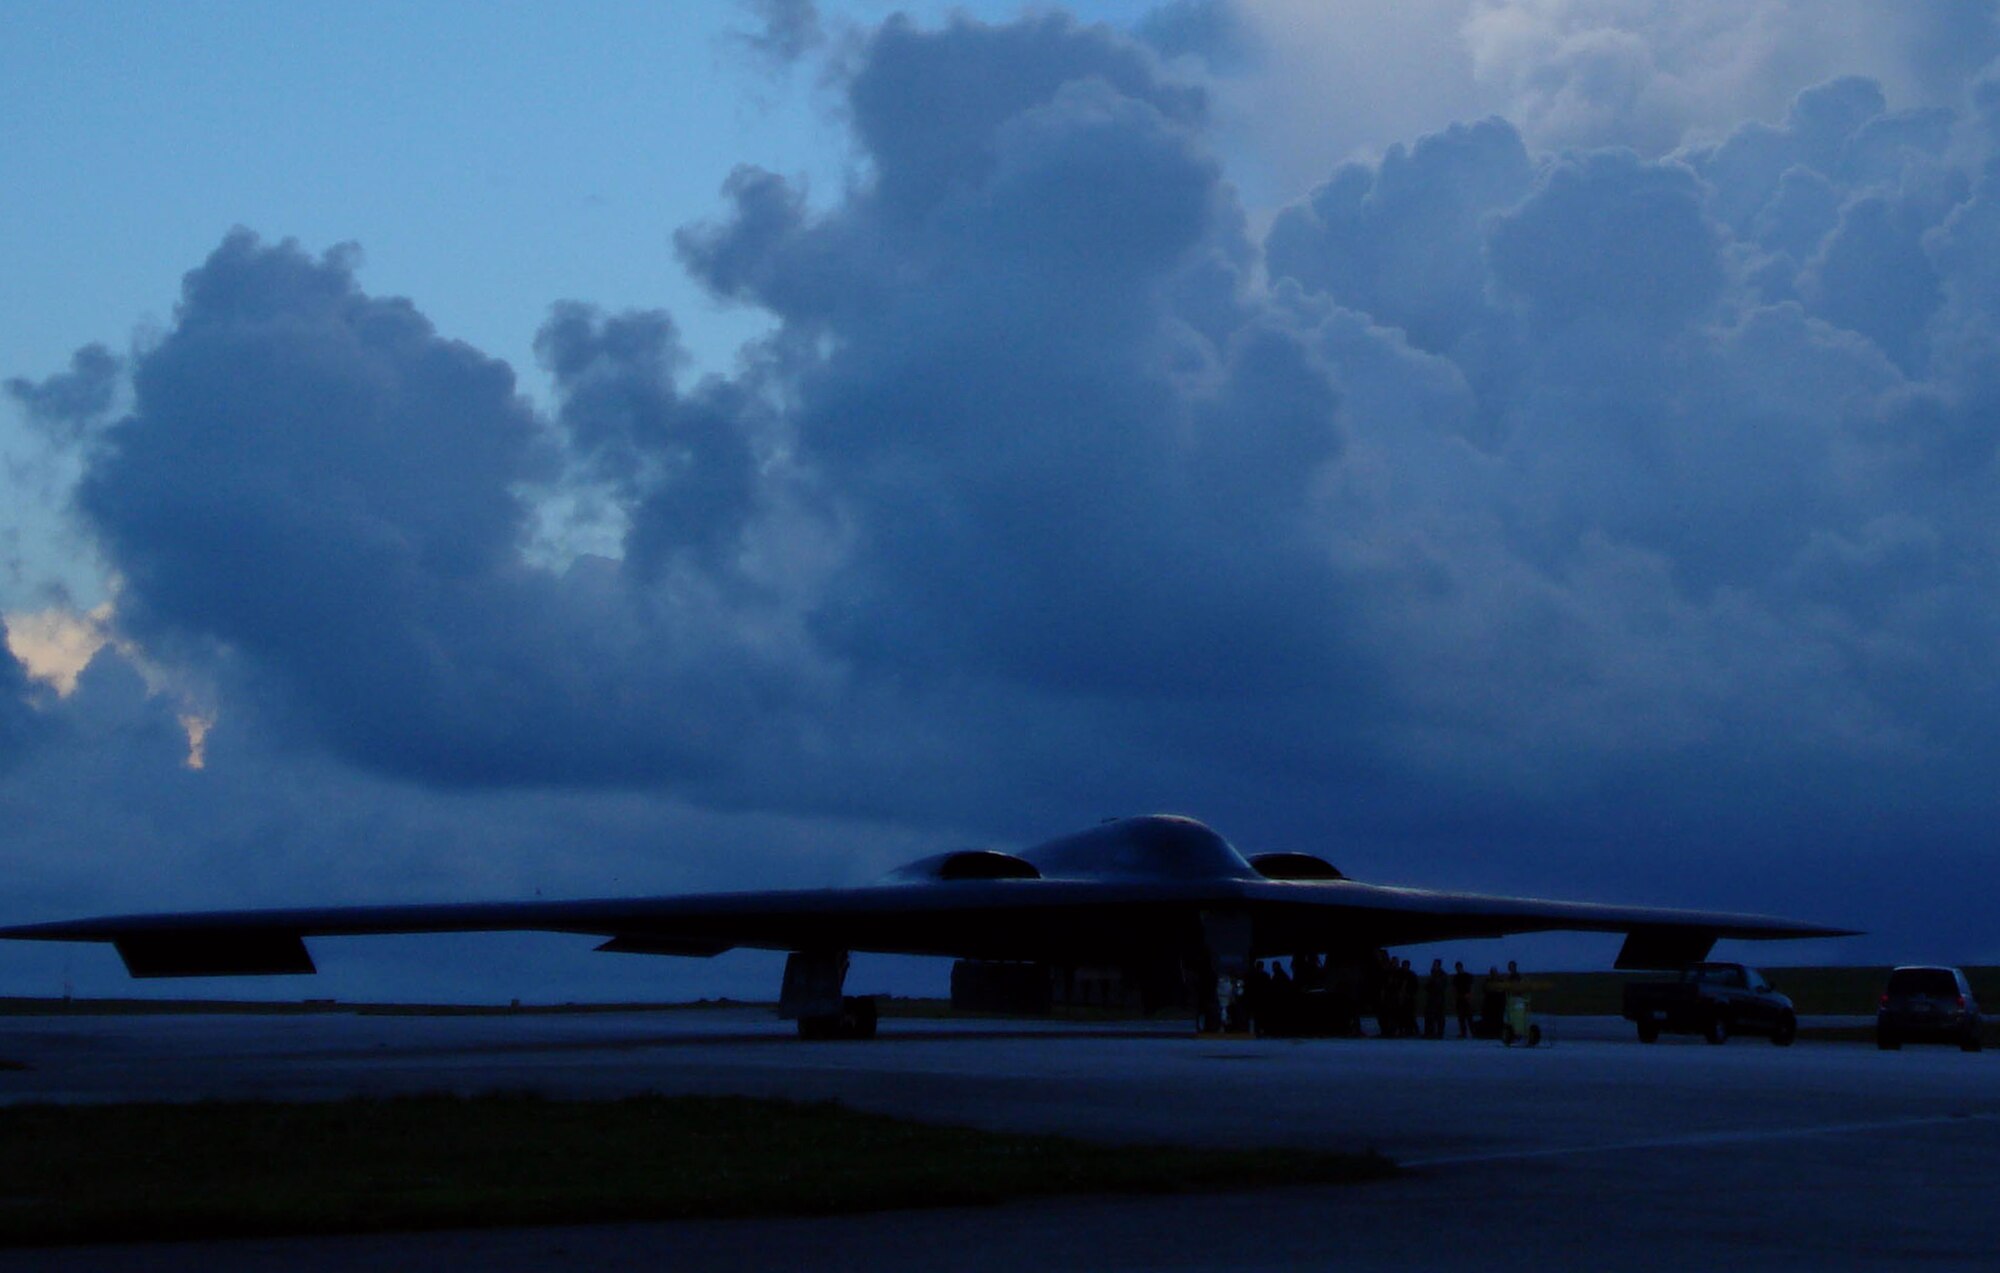 The B-2 Spirits from Whiteman Air Force Base, Mo., arrive here under cloudy skies and a rainy evening 7 Oct. This stealth bomber is parked on the tarmac at Andersen Air Force Base and is immediately serviced by maintenance crews after its arrival. The Spirit is a two-person aircraft and is equipped with stealth technology. These airframes are replacing the B-52 Stratofortresses deployed here from Barksdale Air Force Base, La. (Air Force Photo/Capt. Bryan Florio)

